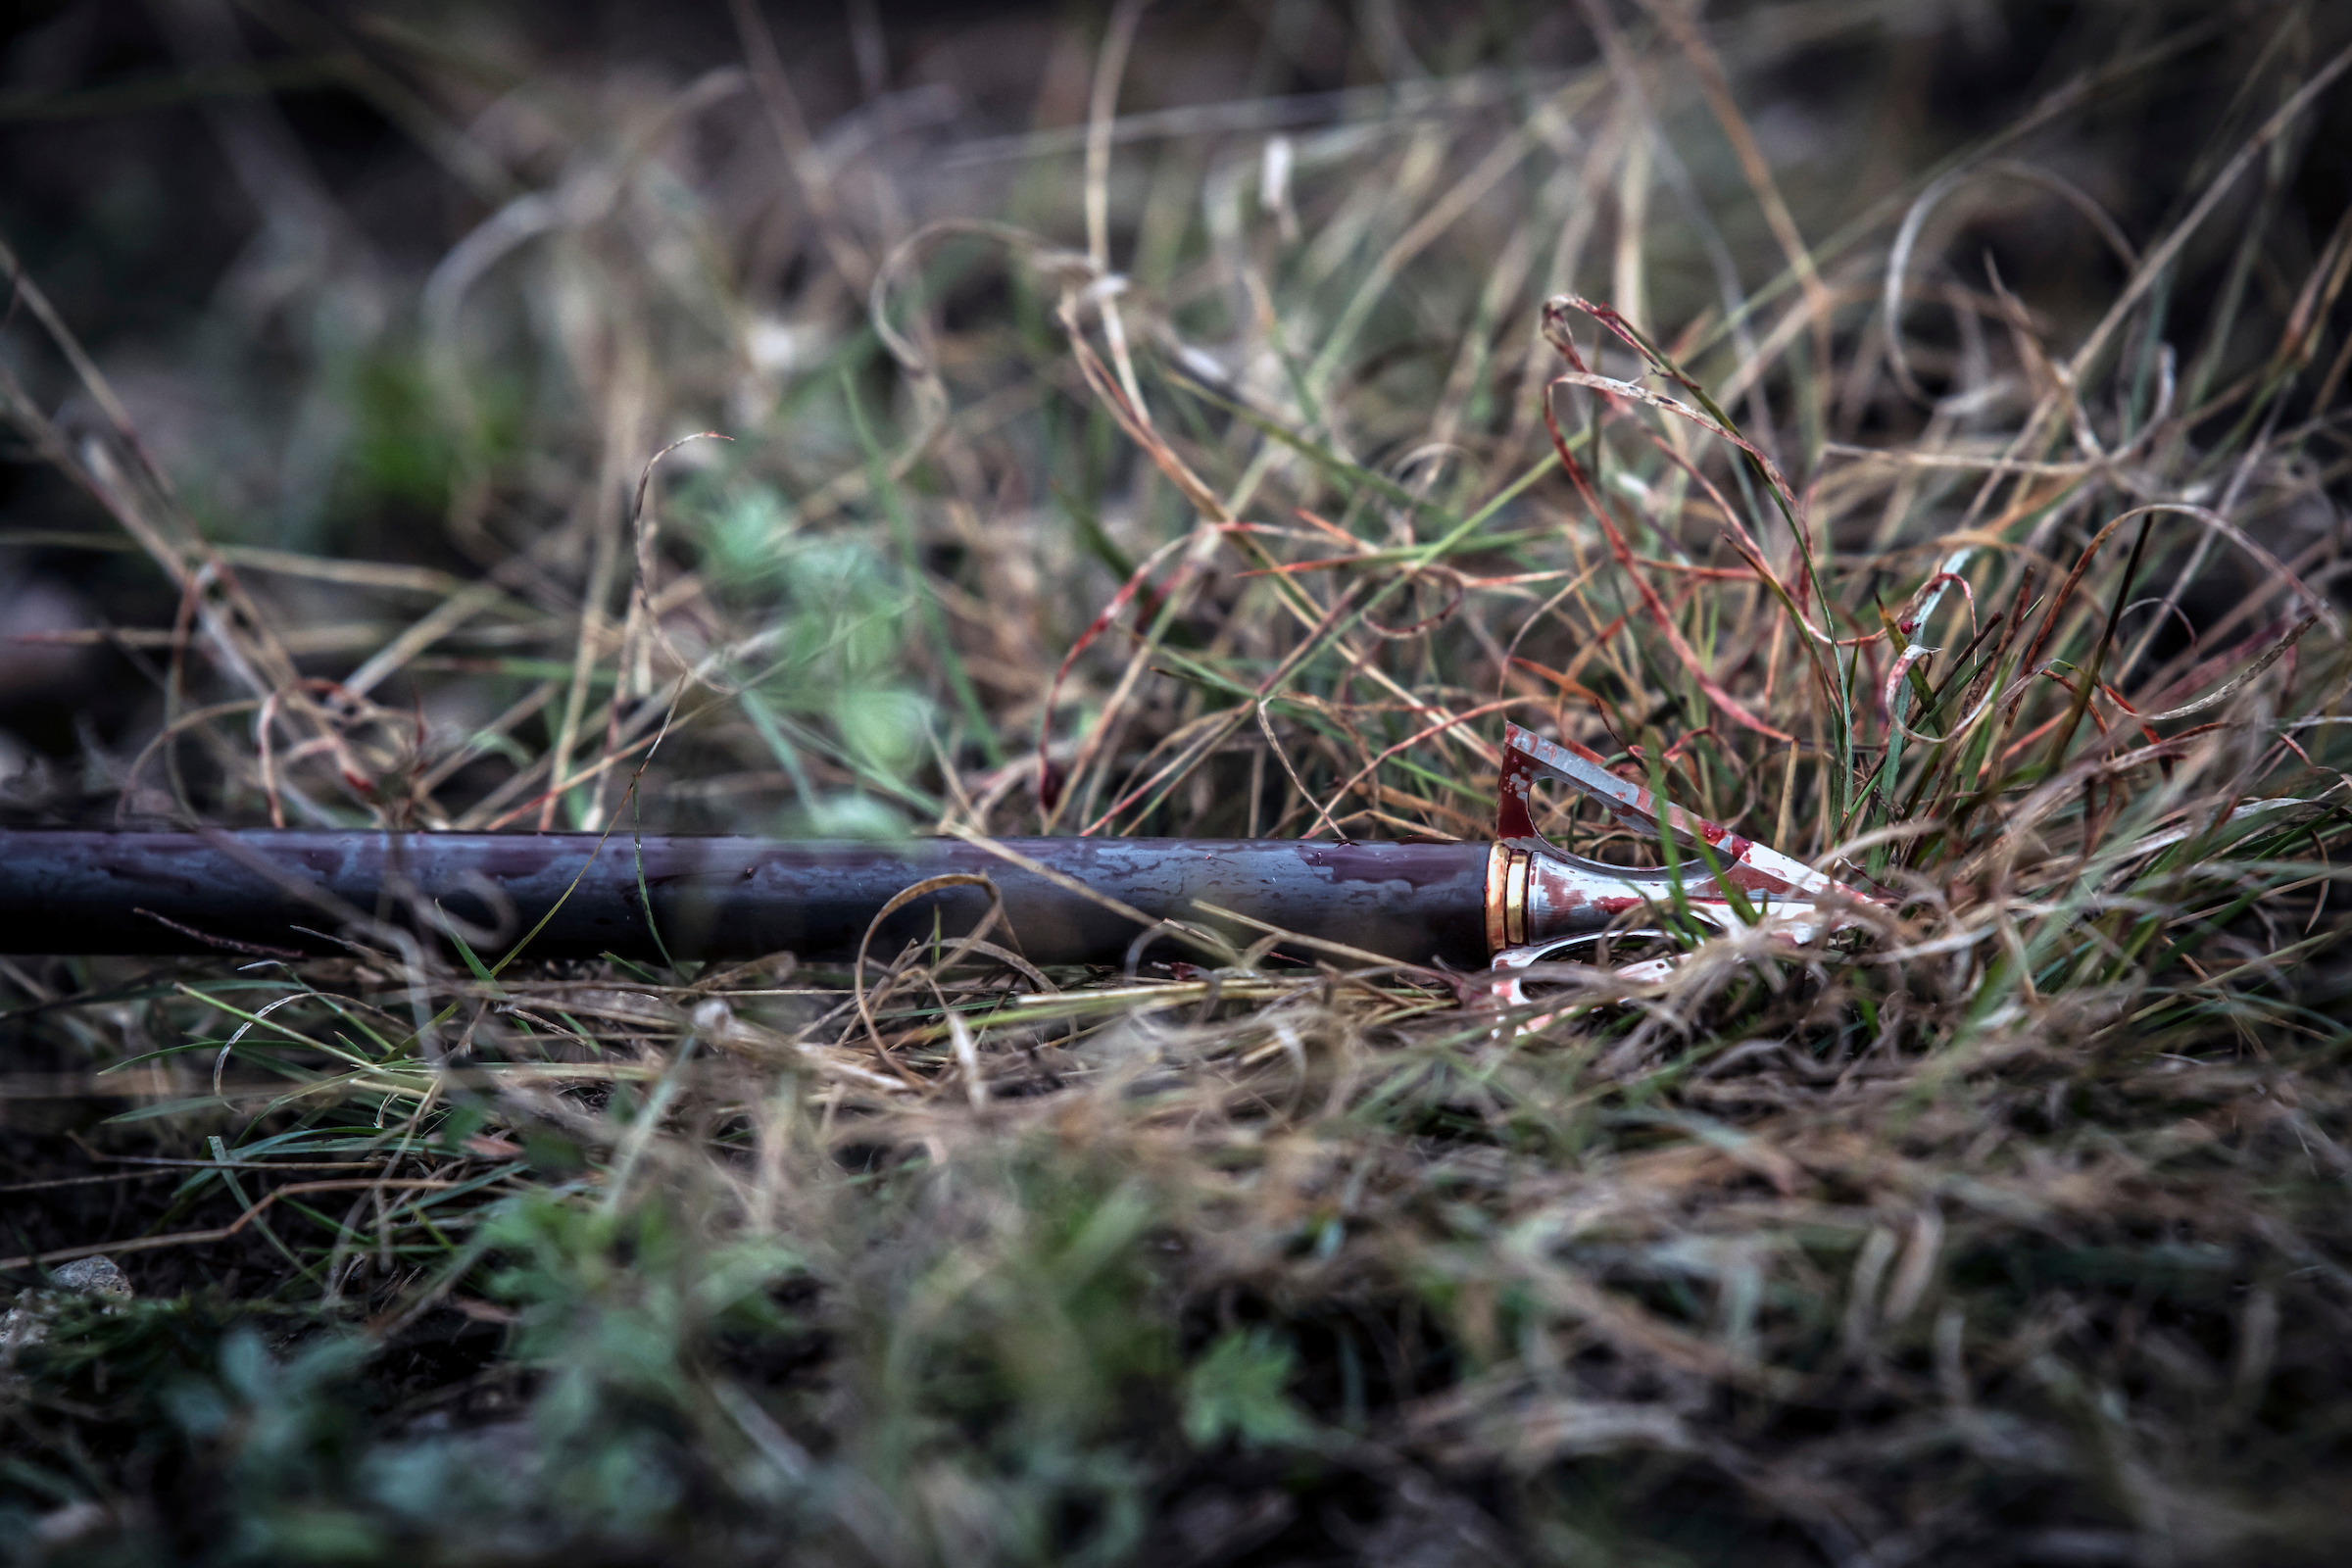 A broadhead attached to a carbon hunt, both coated in blood, lying in a dry grass field with a little blood on the grass.